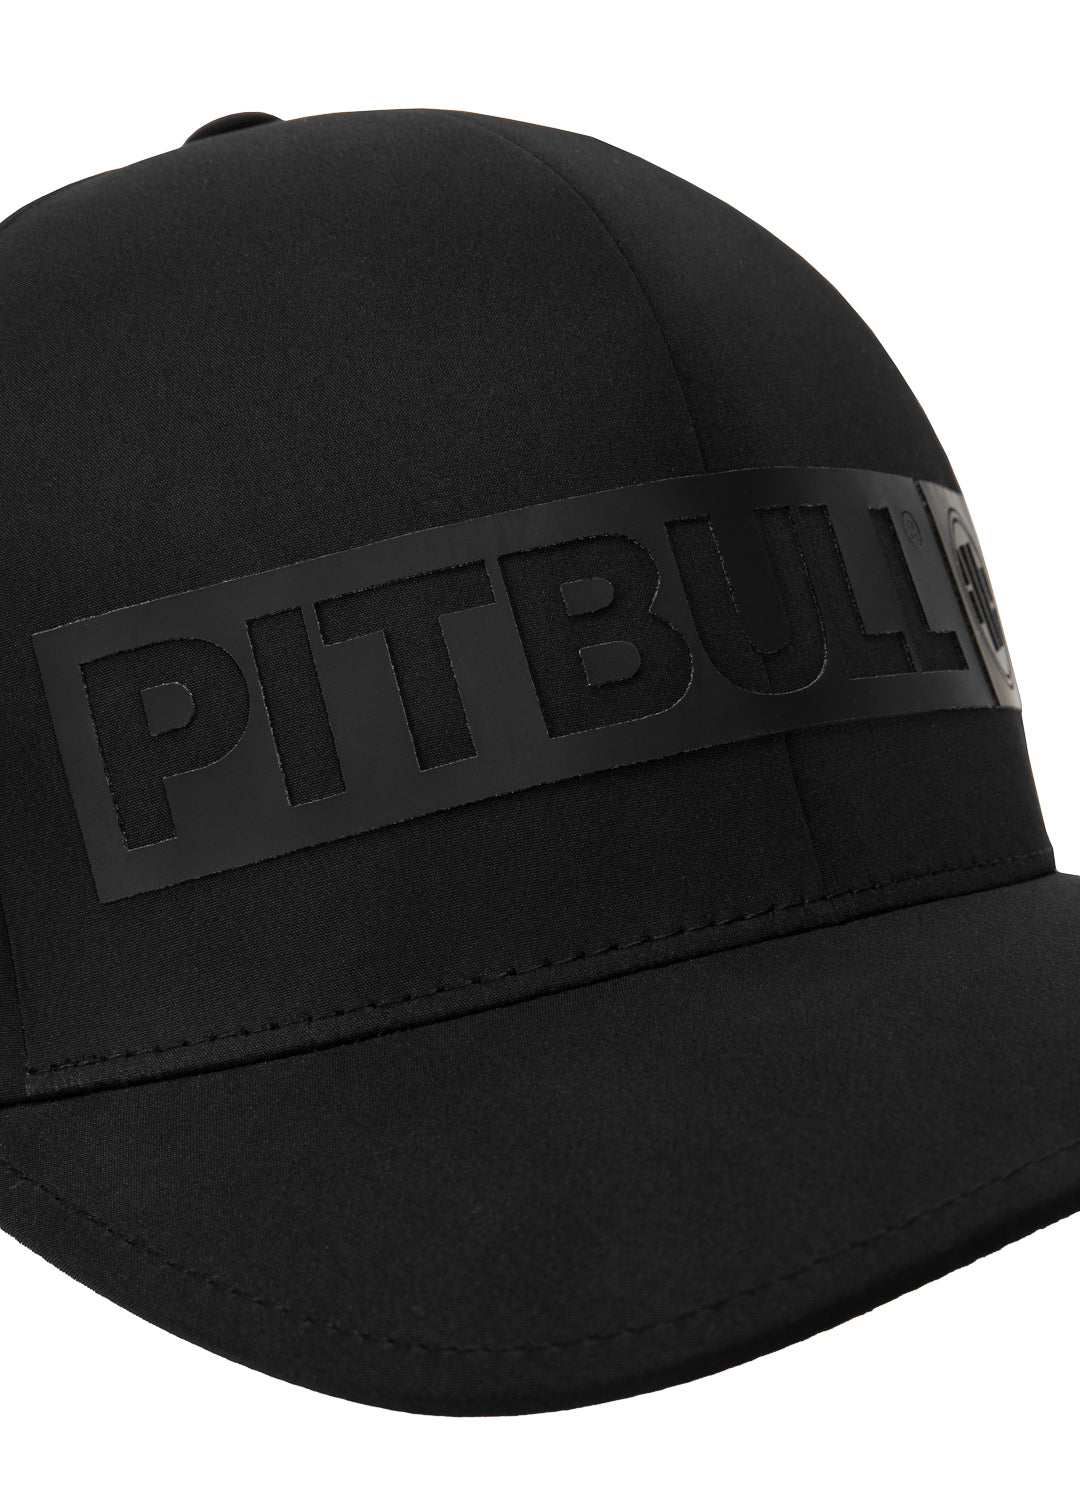 HILLTOP Stretch-Fitted Black Snapback